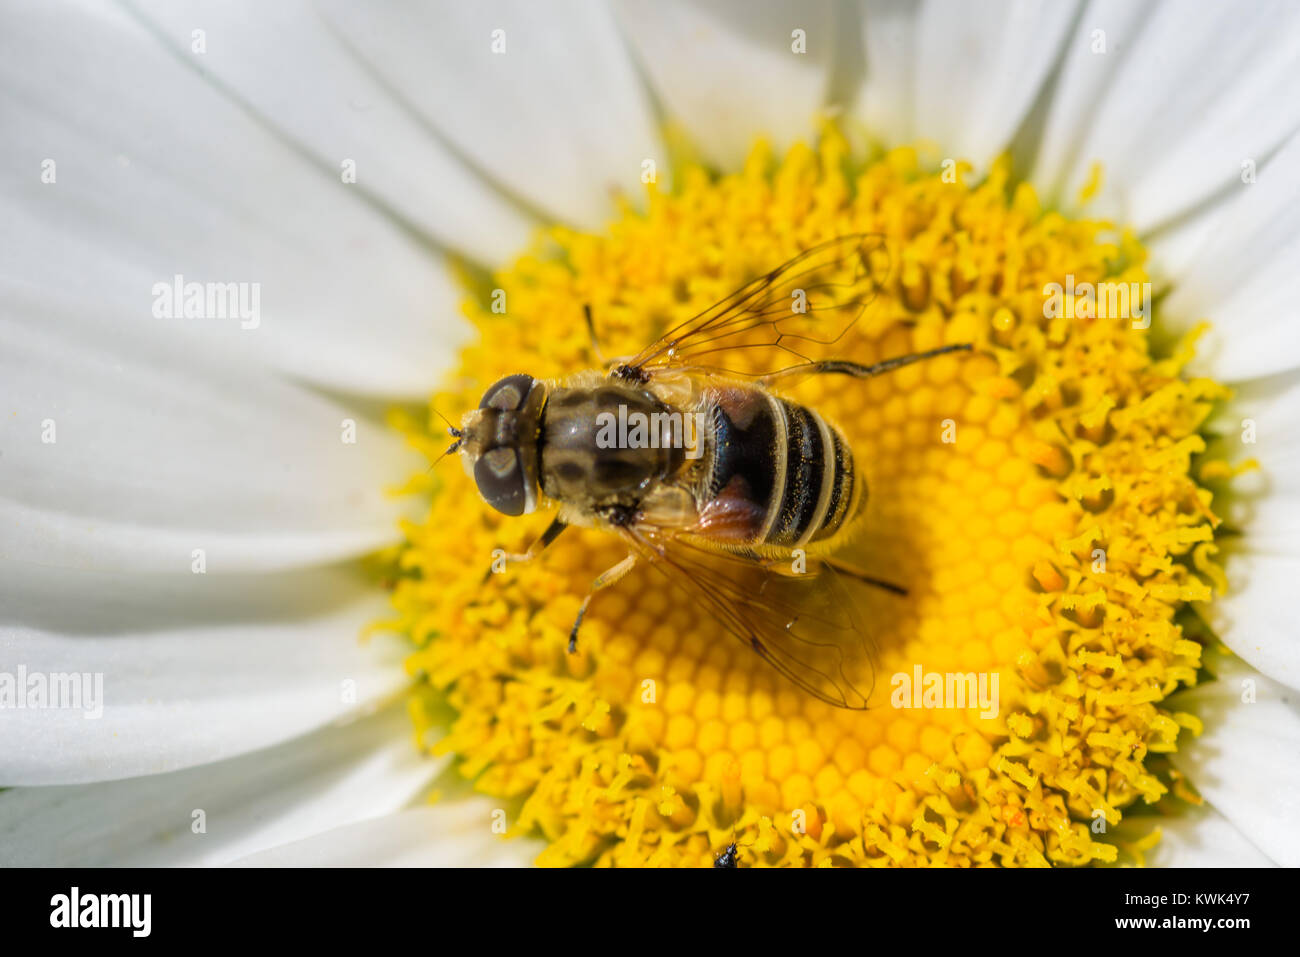 extreme close up of a honey bee pollinating a daisy flower in summer Stock Photo